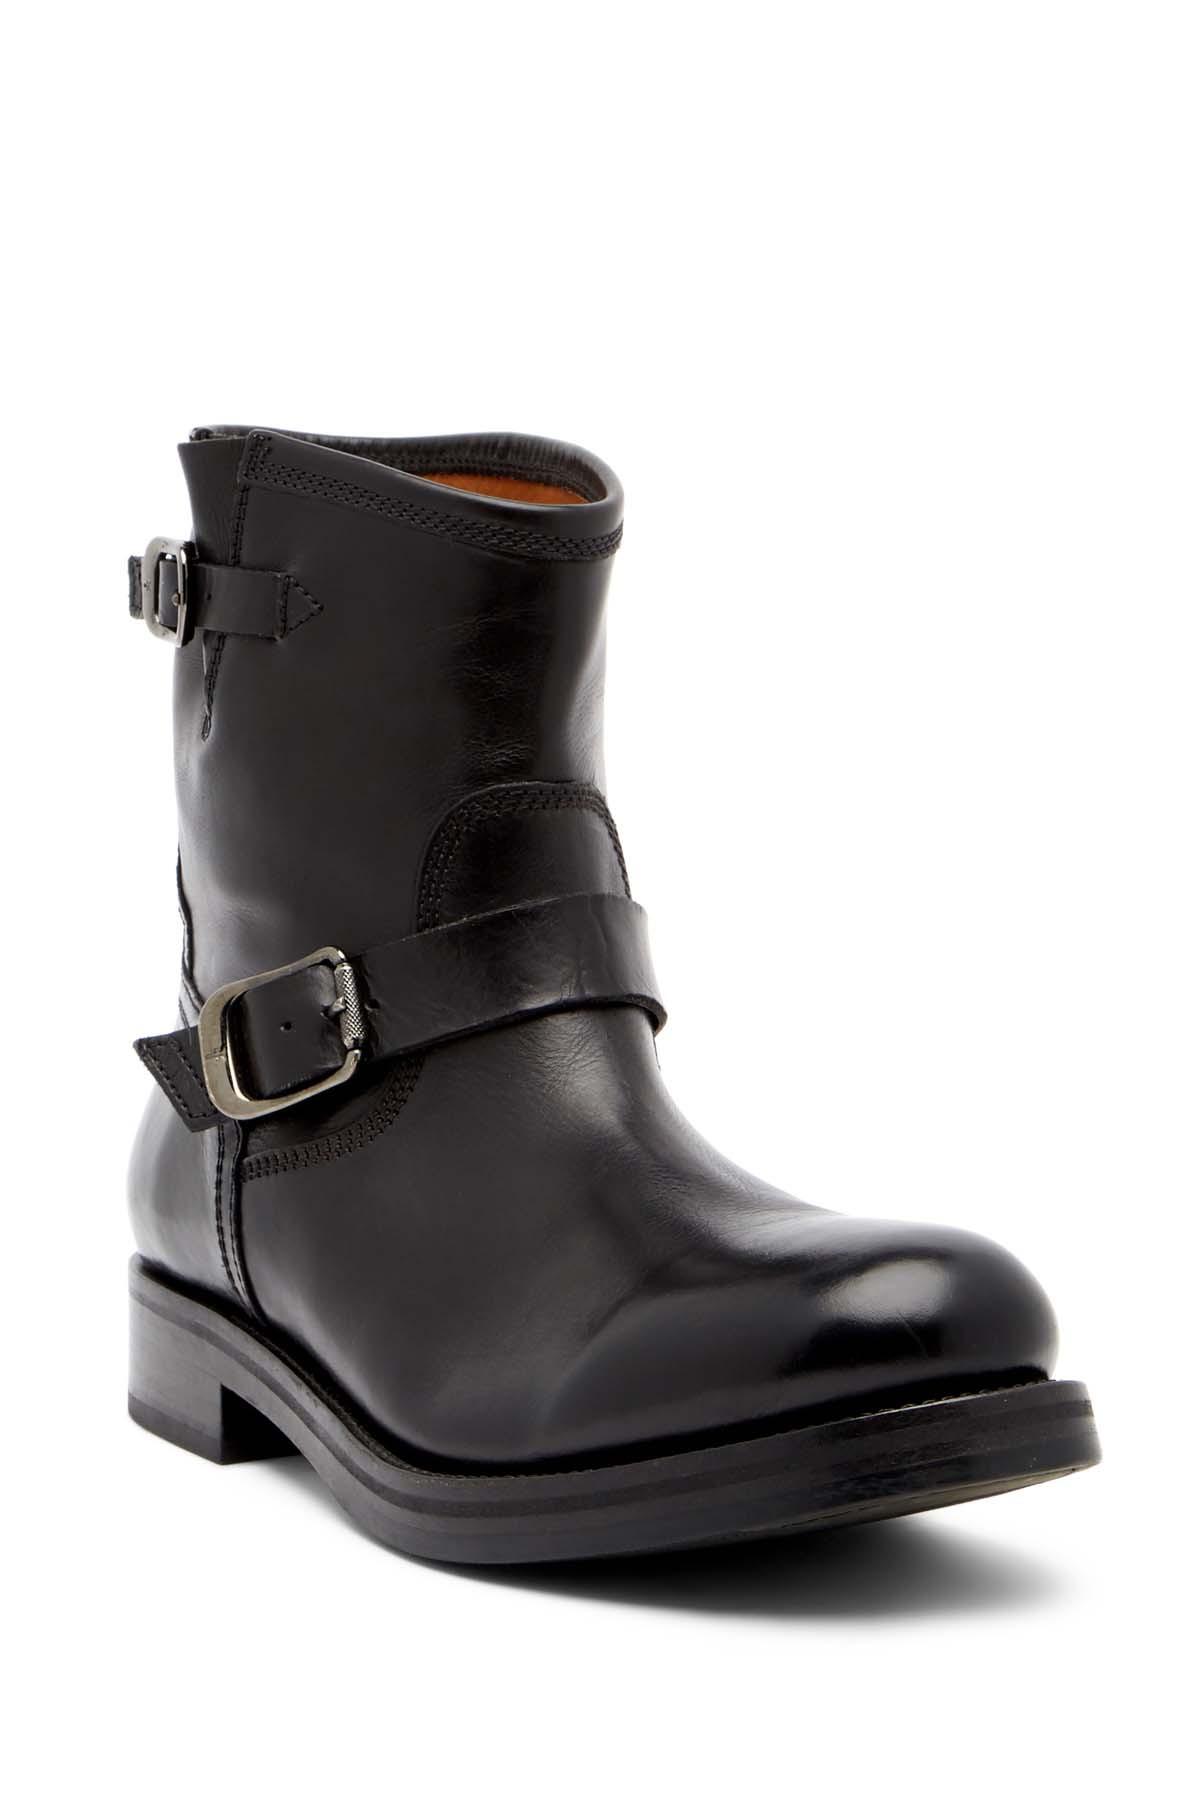 Frye Engineer Boots : Frye Engineer 8r Boots in Black (Charcoal) | Lyst ...